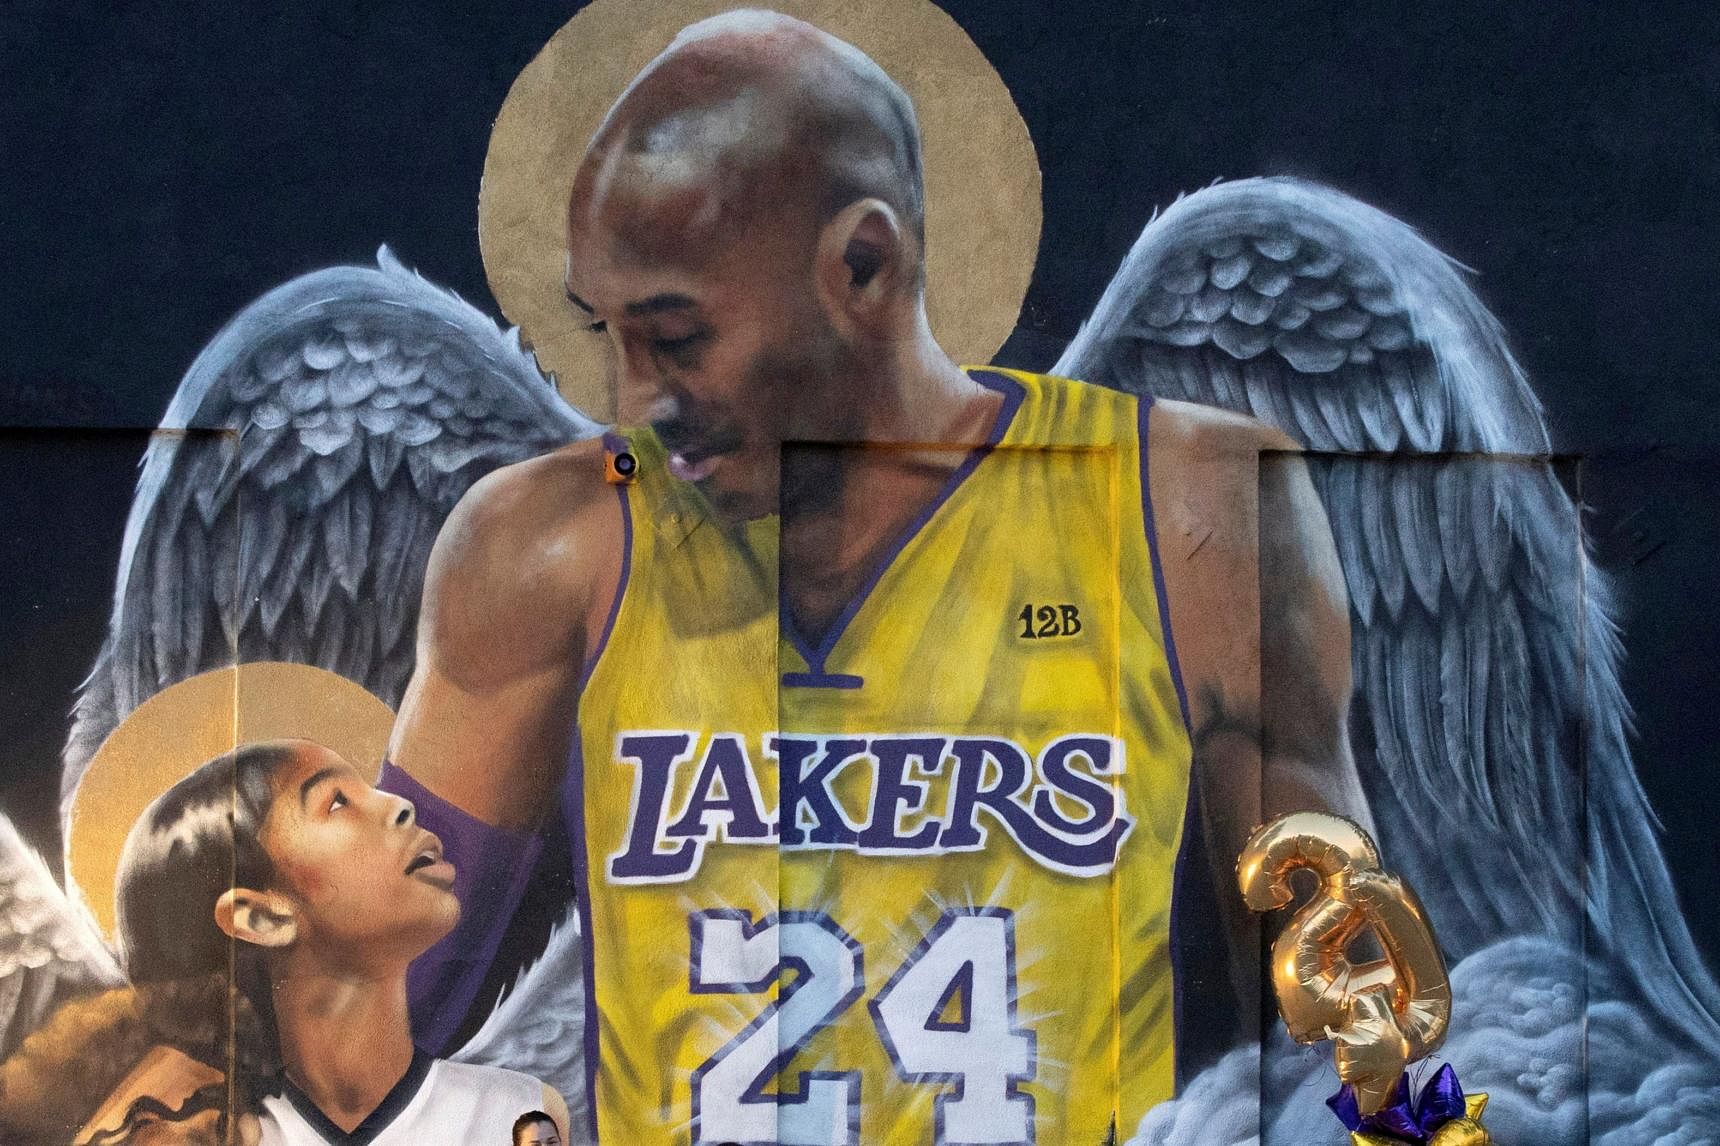 NBA: Iconic Kobe Bryant jersey sells for US$5.8m at auction